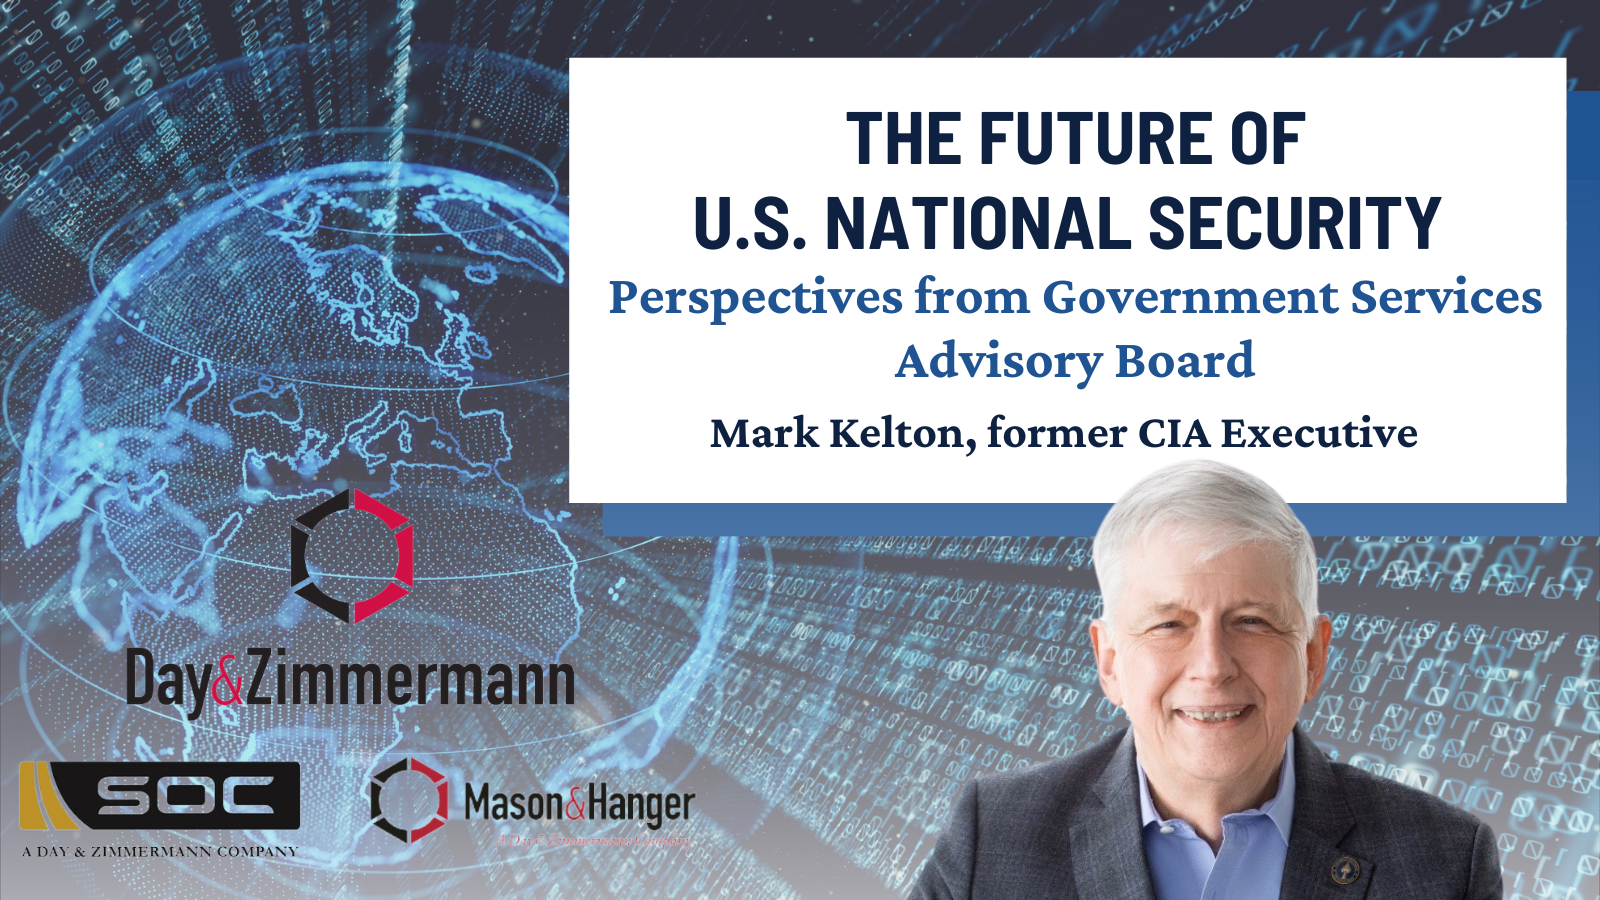 The Future of U.S. National Security with Mark Kelton, Former CIA Executive featured image